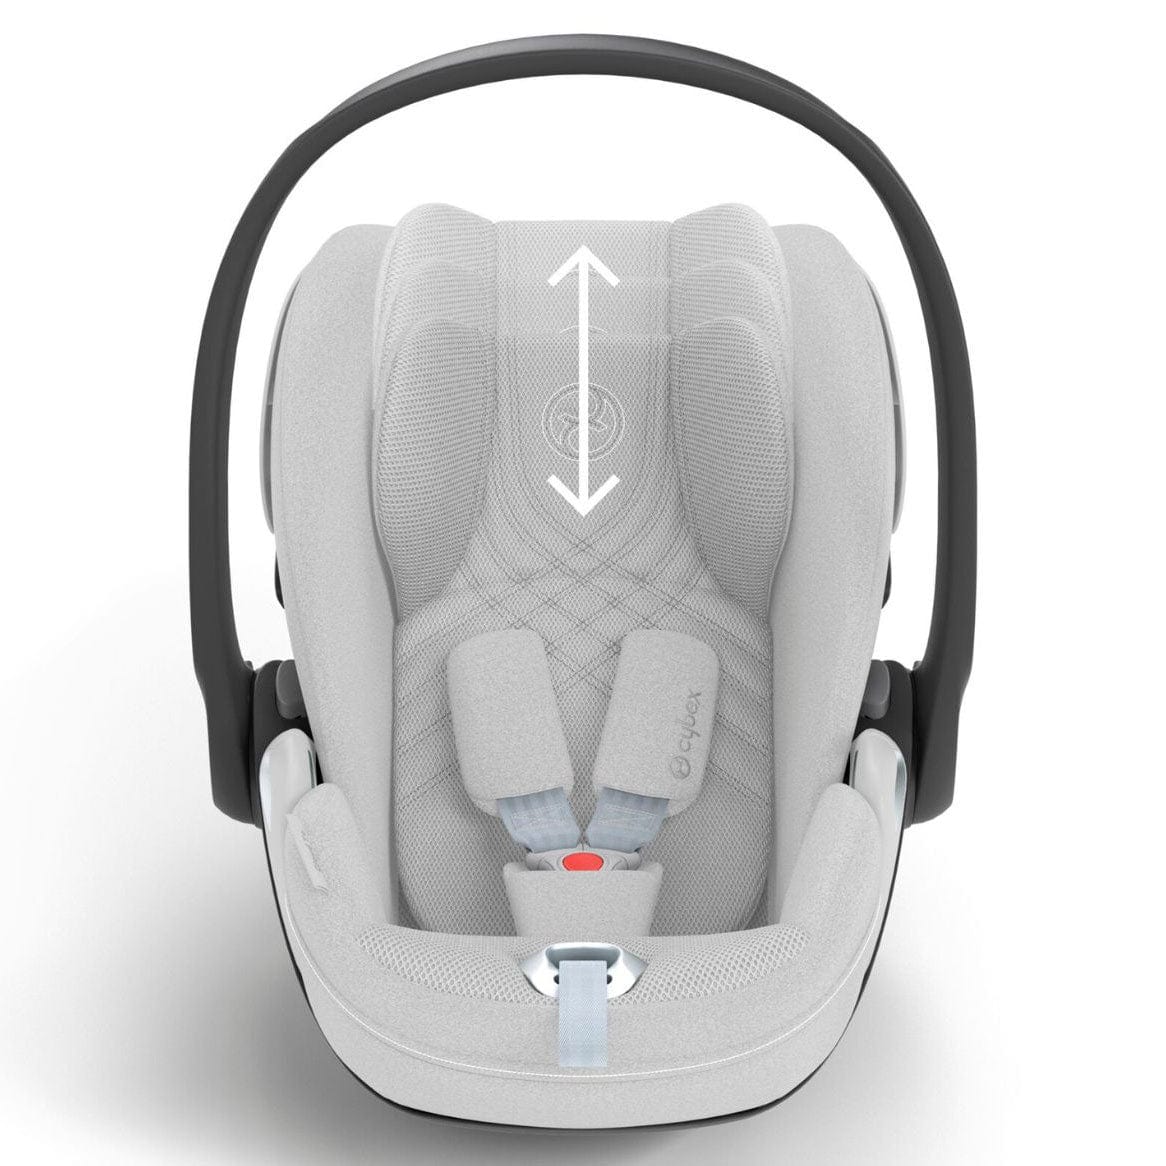 Cybex Cloud T PLUS i-Size Car Seat in Platinum White Baby Car Seats 523000245 4063846402953